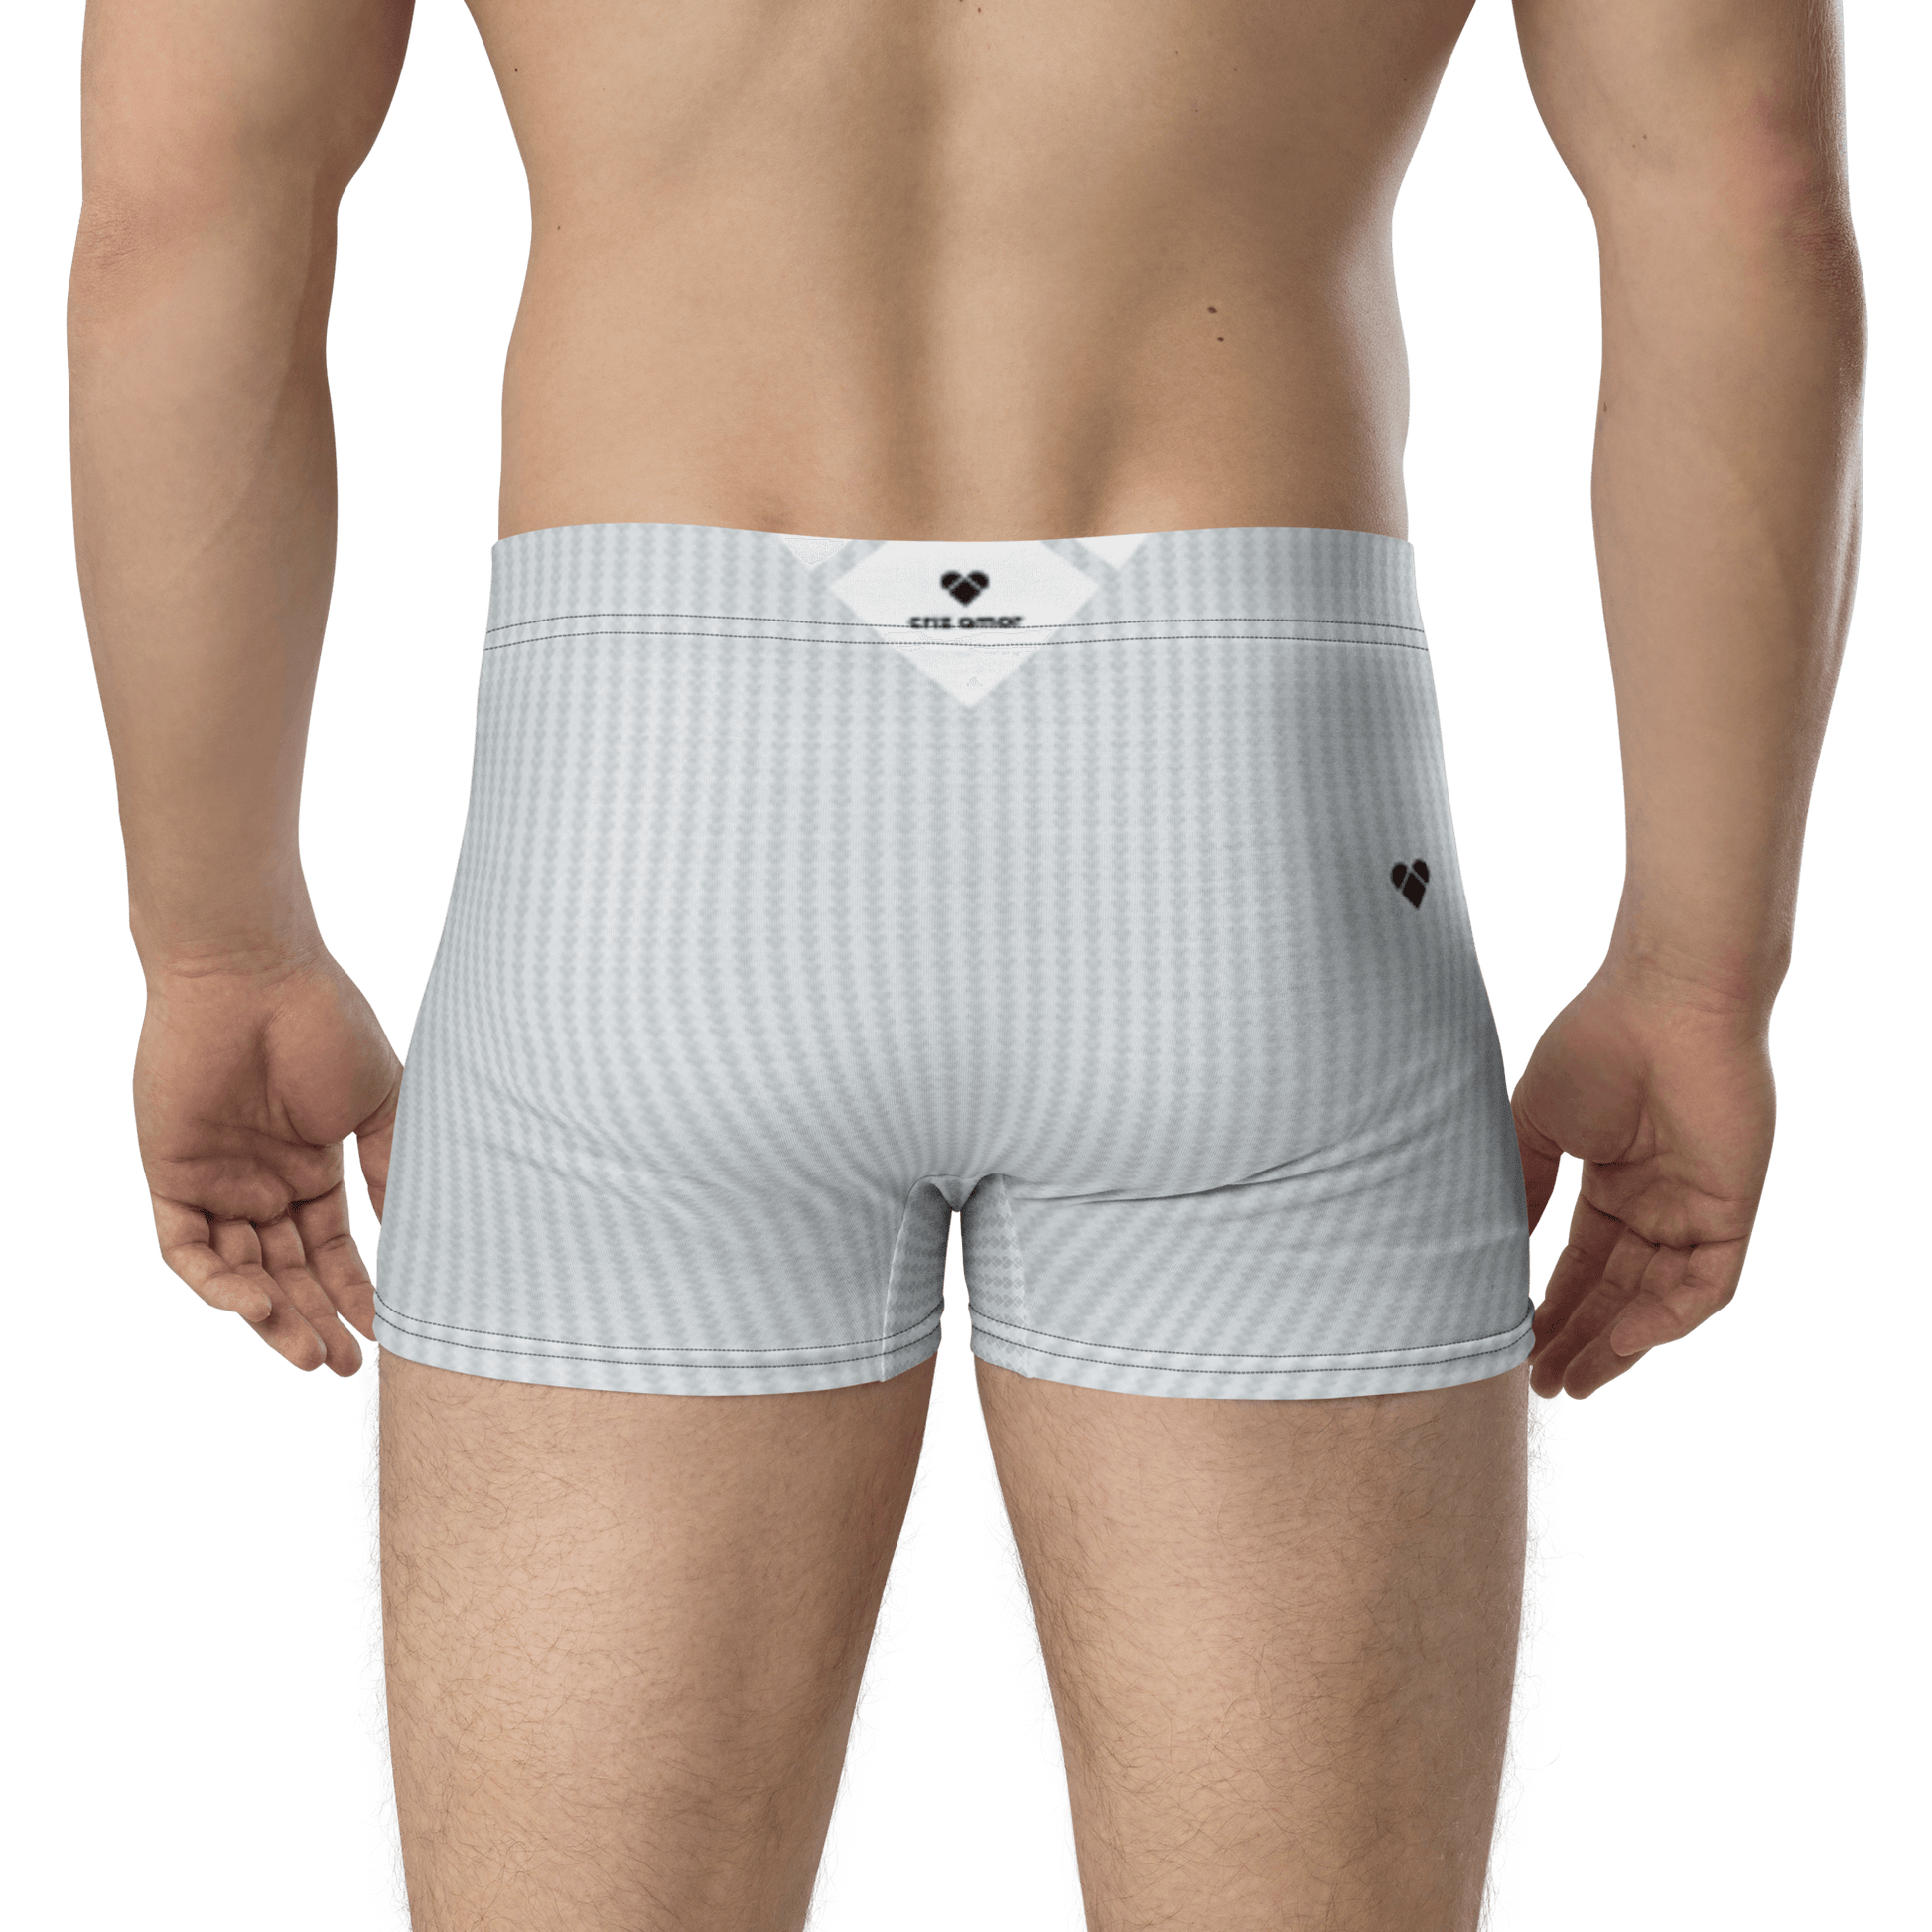 CRiZ AMOR's Lovogram boxers, perfect for a stylish and empowering look